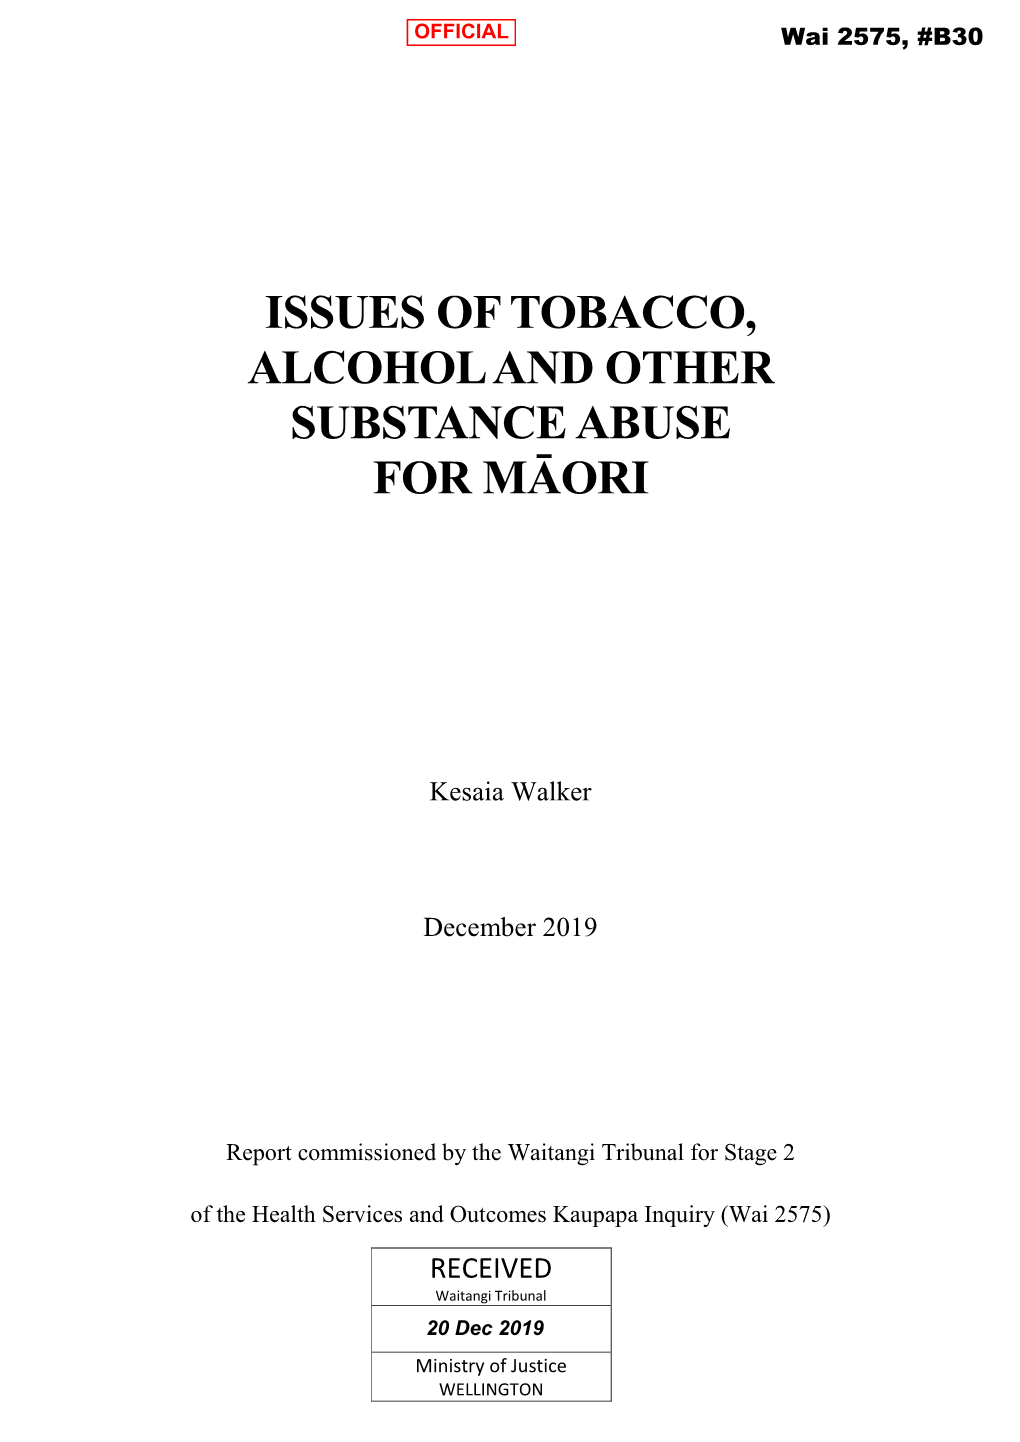 Issues of Tobacco, Alcohol and Other Substance Abuse for Māori